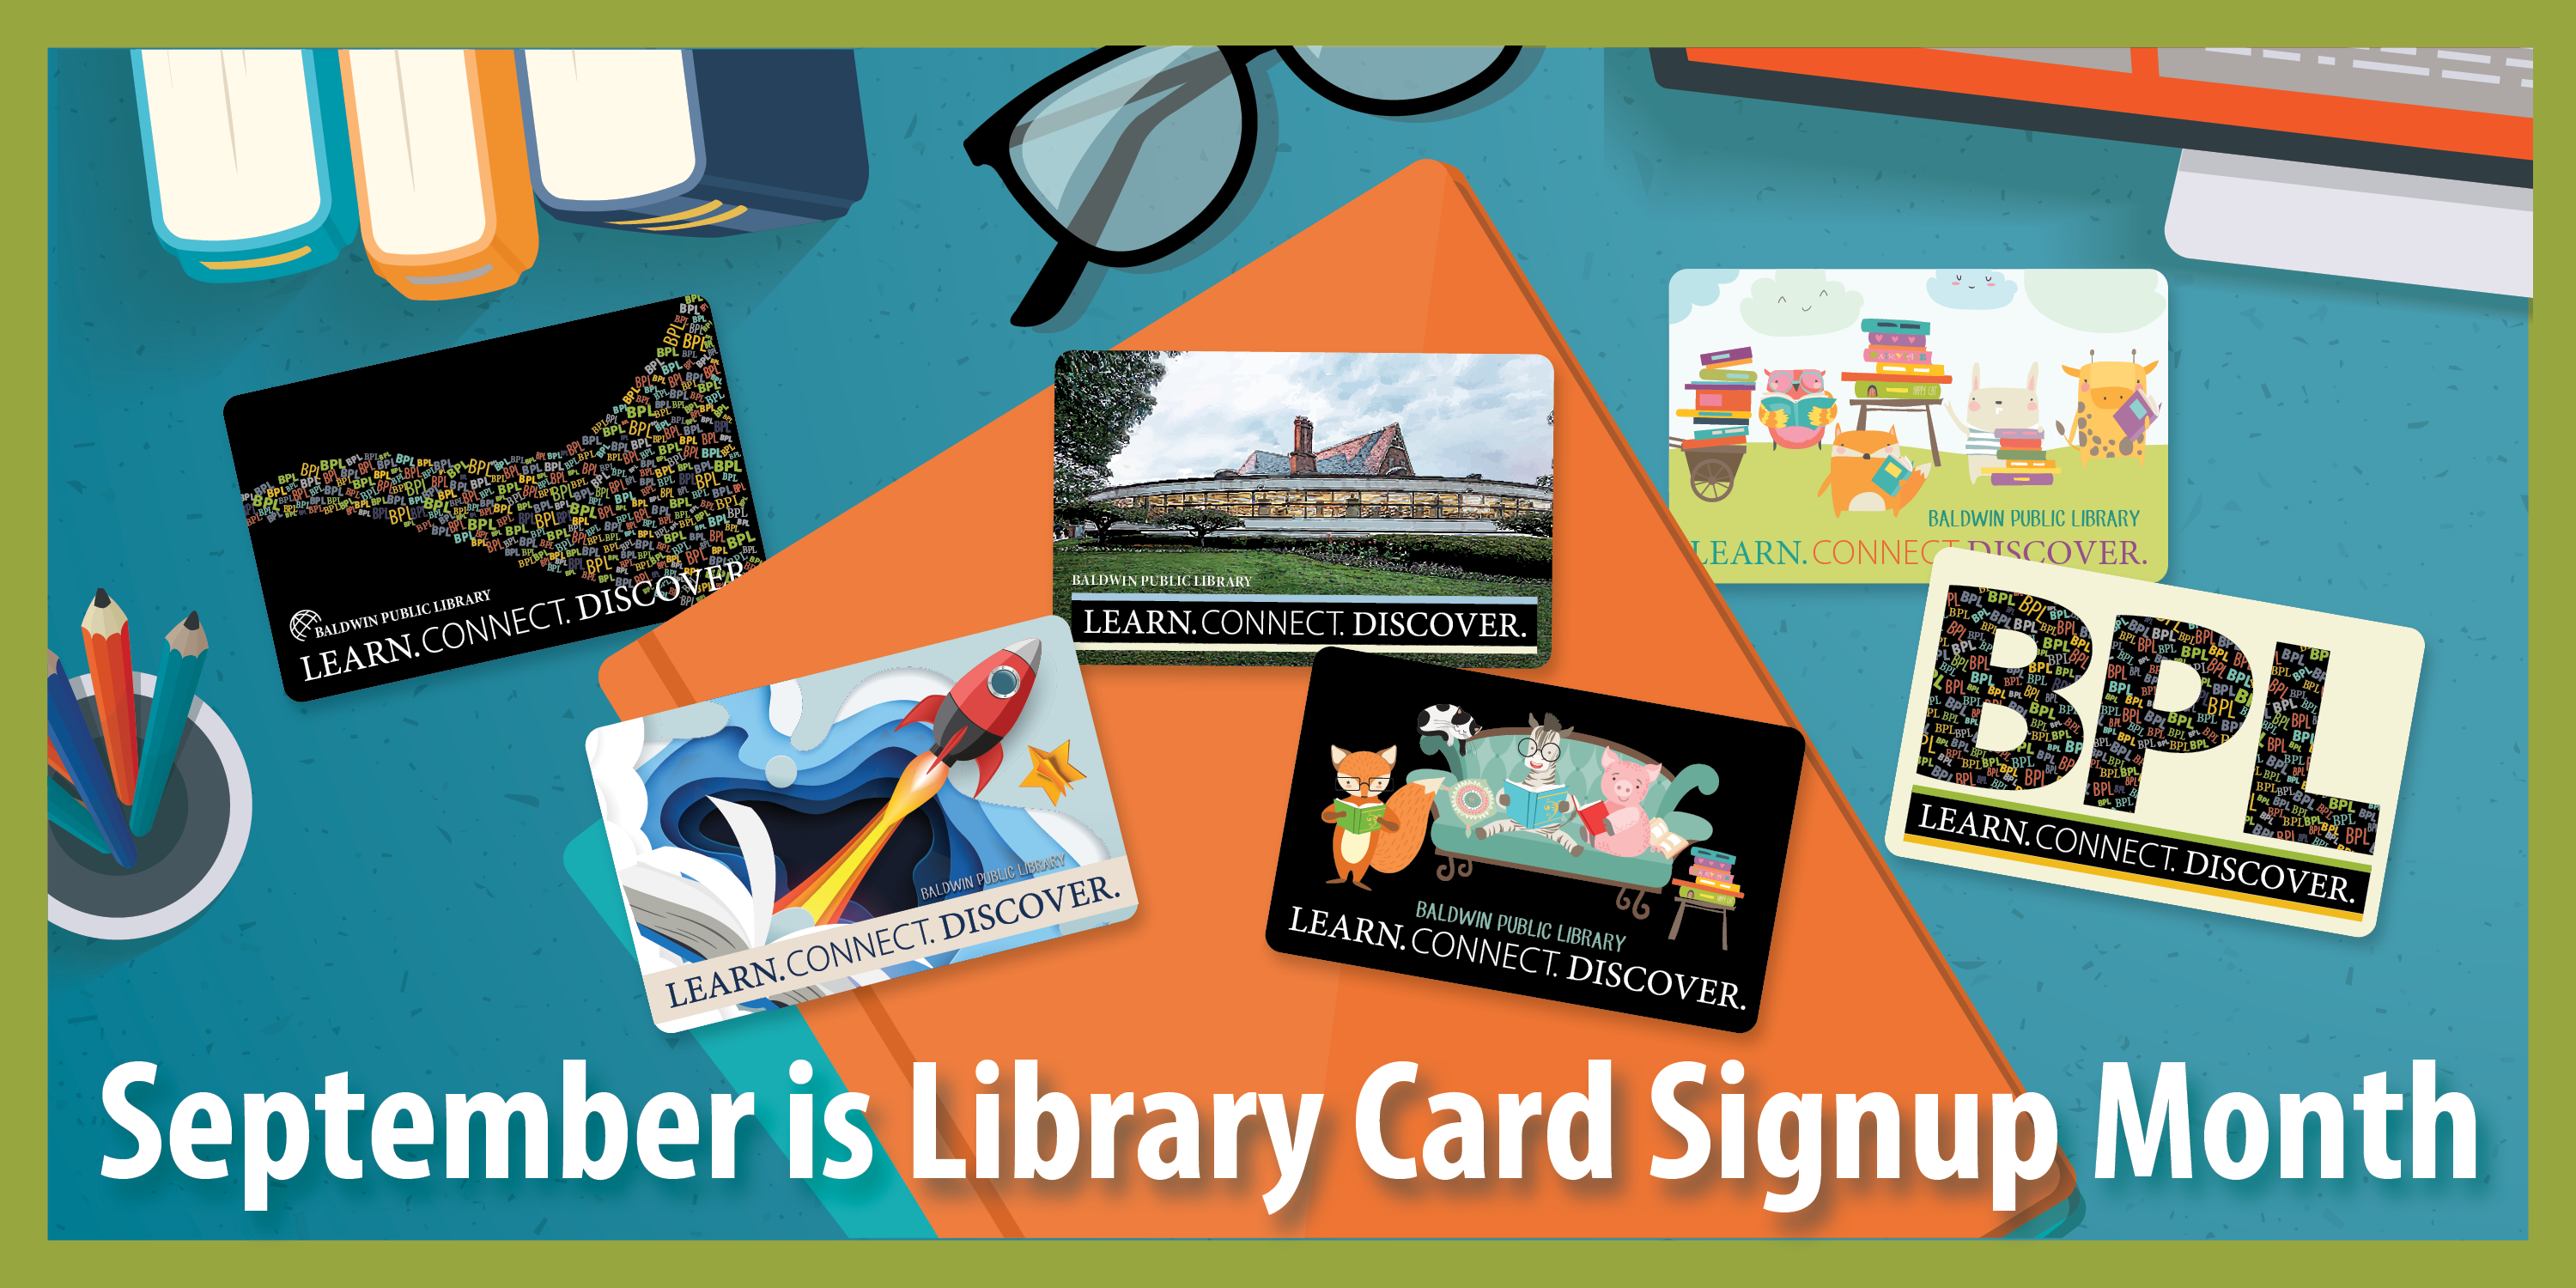 September is Library Card Signup Month!